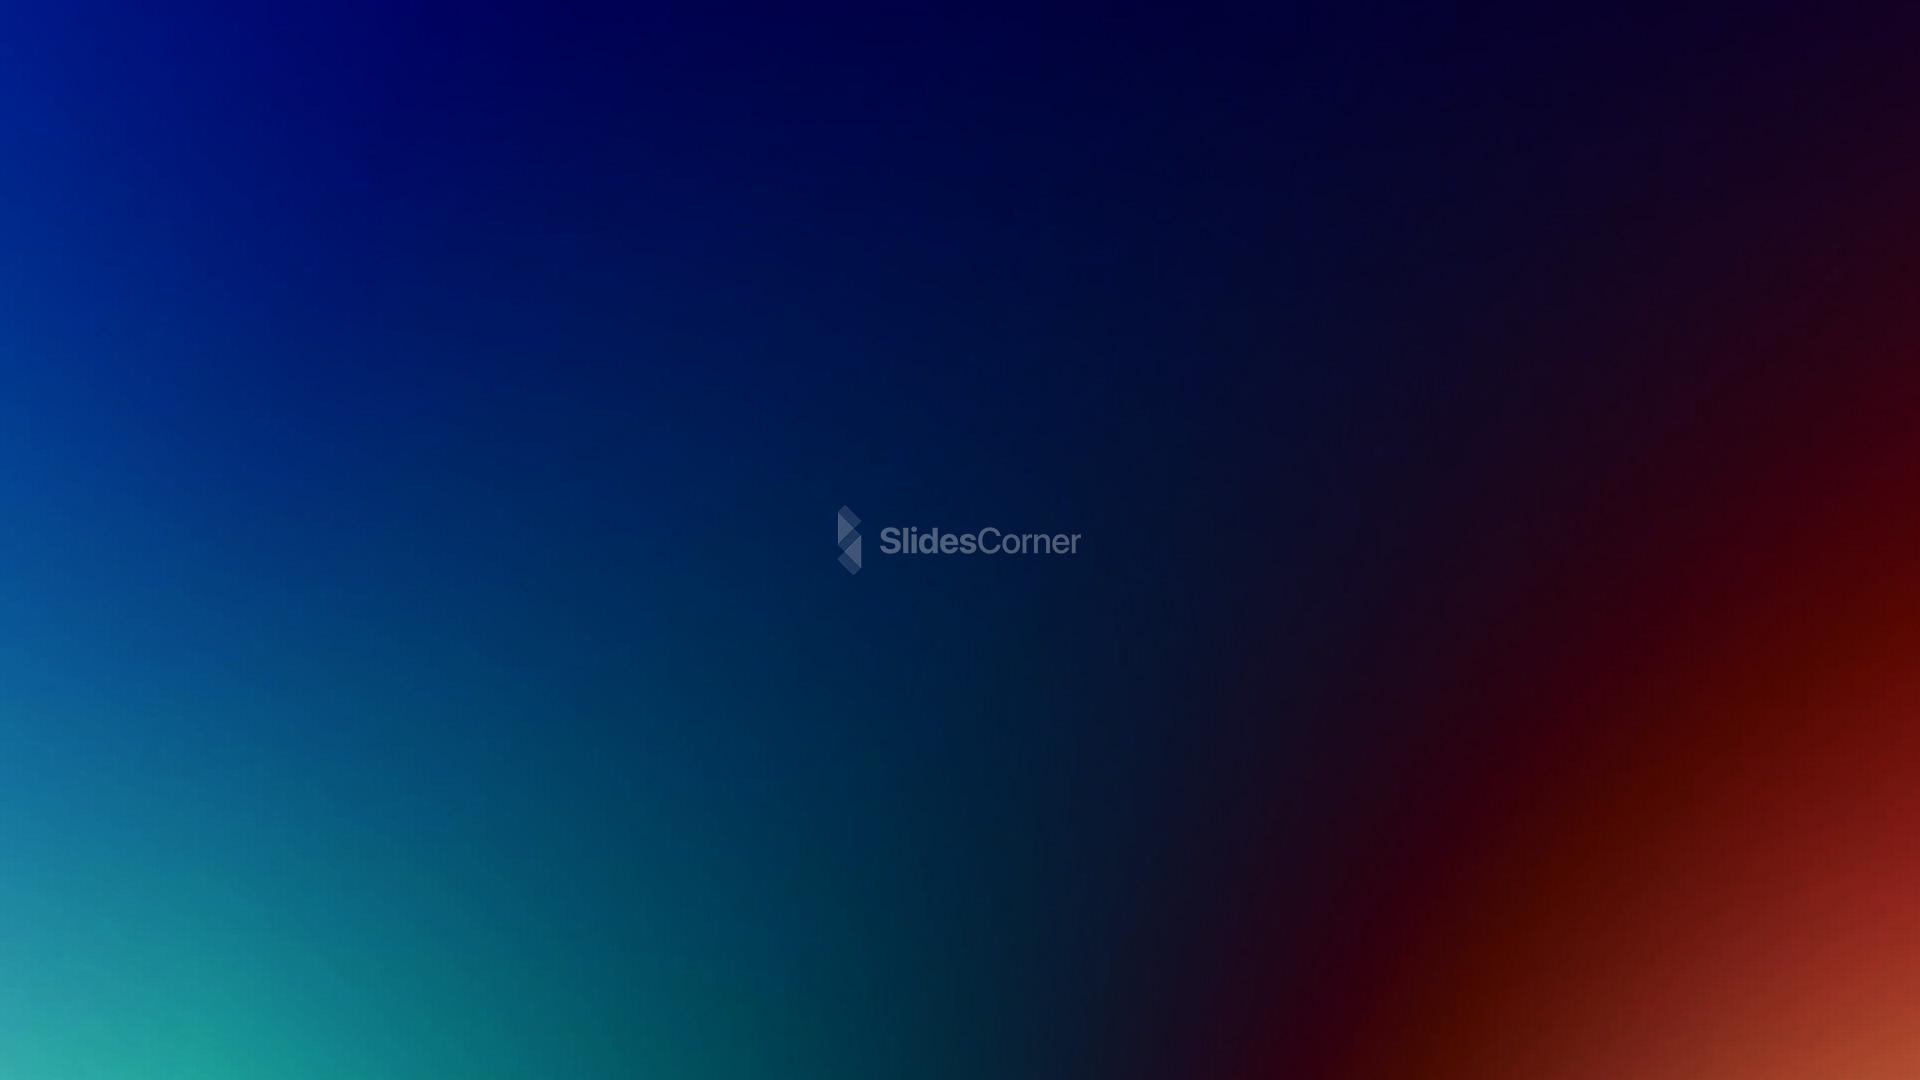 Aesthetic Blue, Red & Green Gradient Background